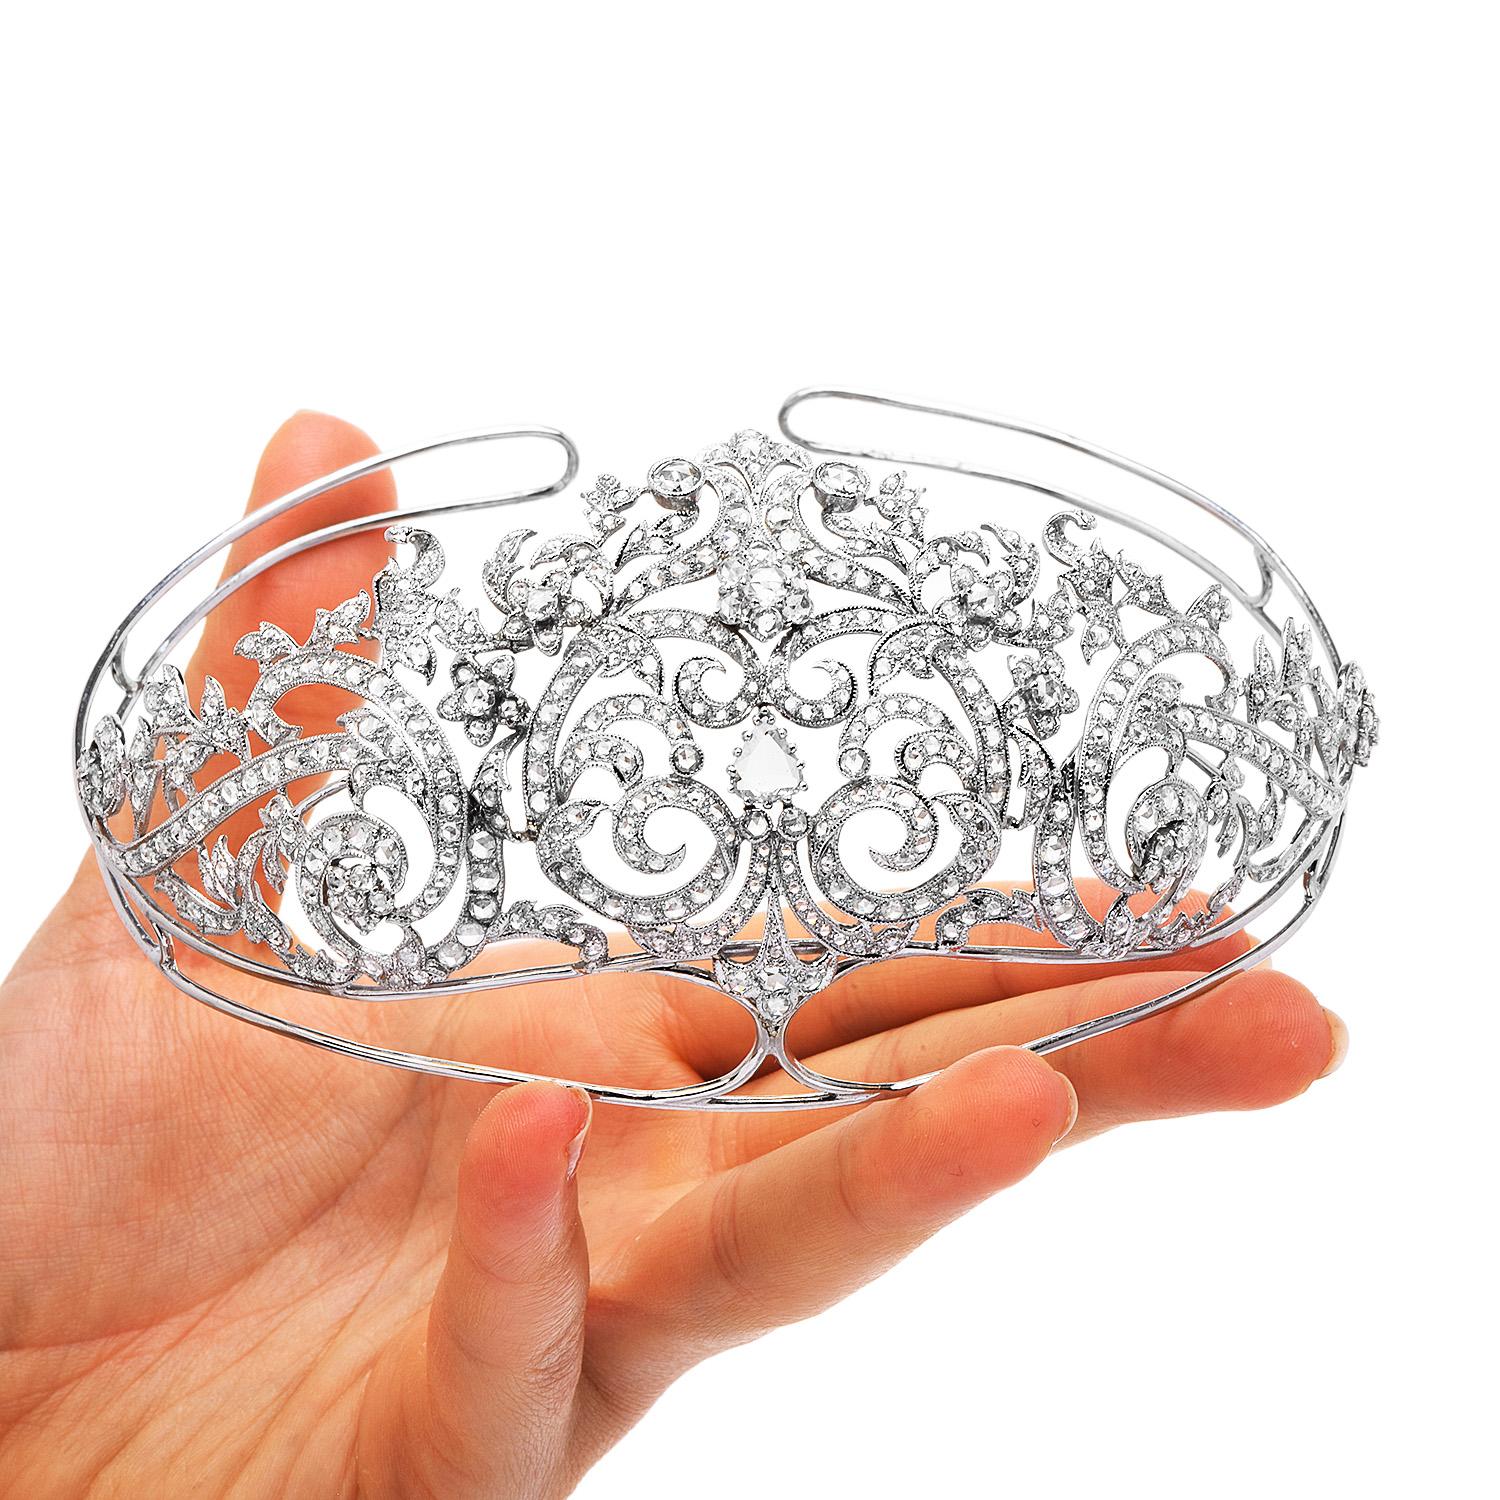 This vintage diamond tiara of captivating floral romantic design and immaculate craftsmanship is handcrafted in 18K white gold and weighs approx. 75.3 grams.

This alluring Victorian style is the perfect high bun hair ornament, designed as an